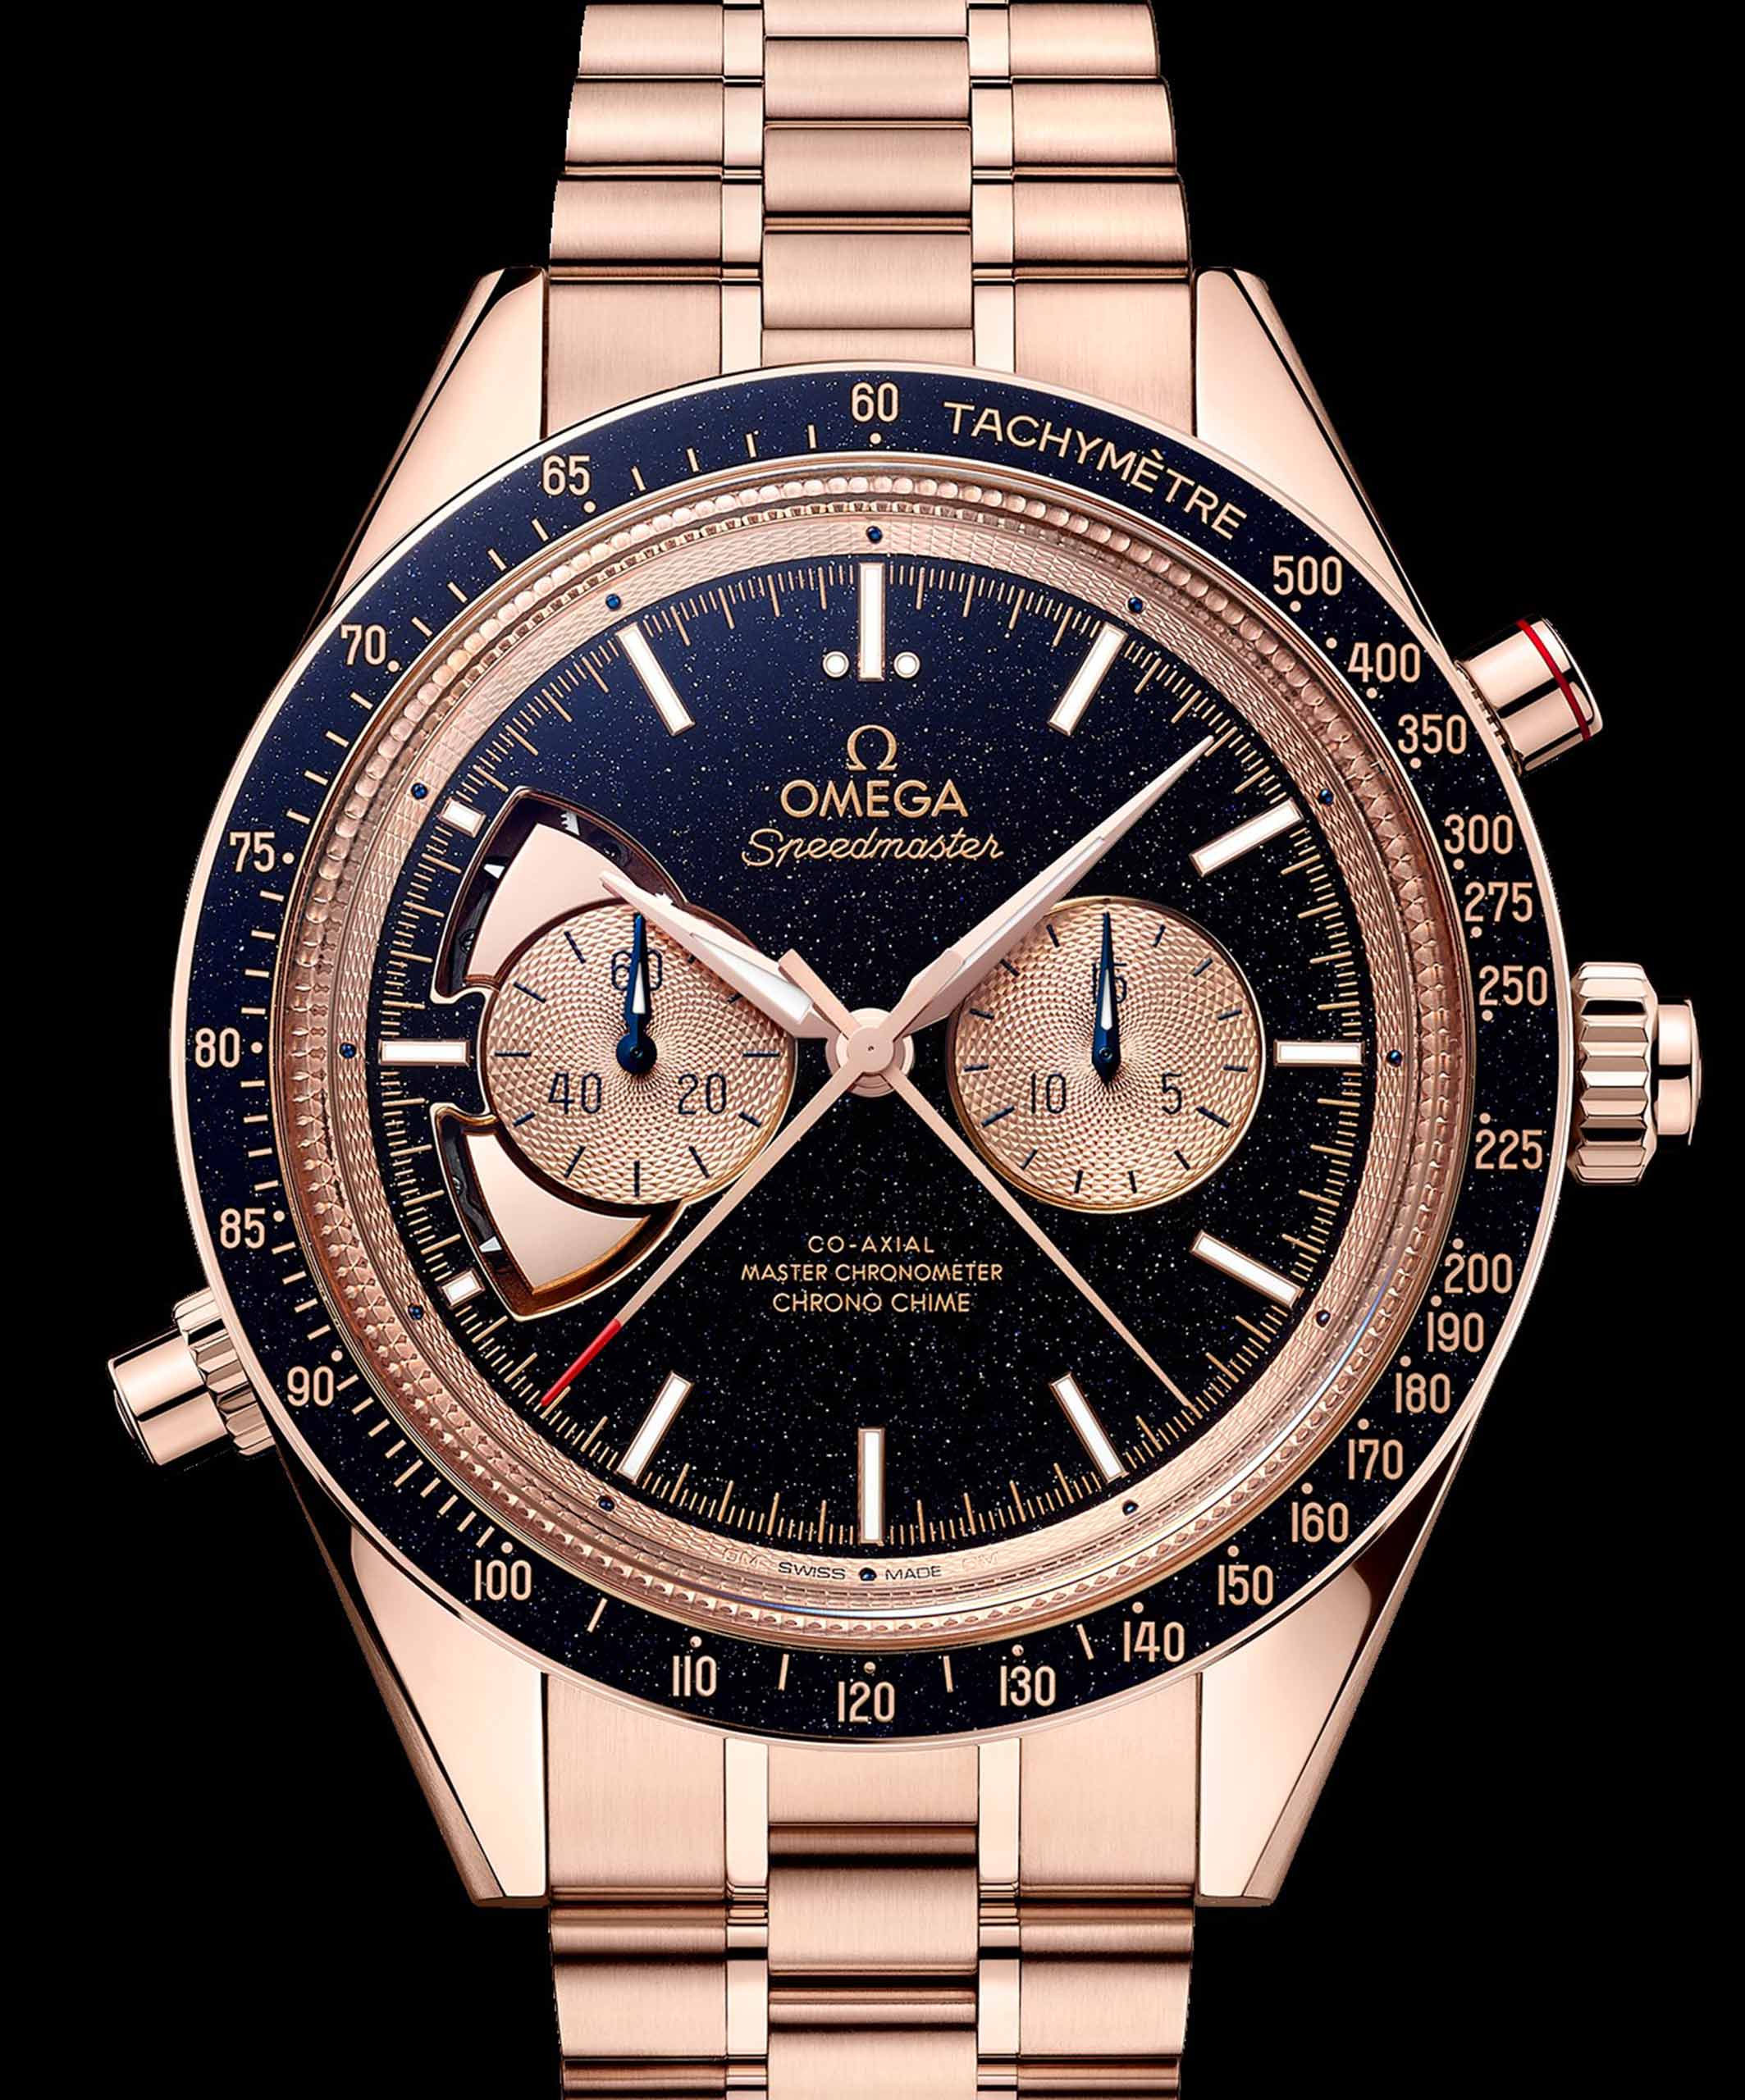 Omega Unveil New Chrono Chime Movement in 1932 Olympic and